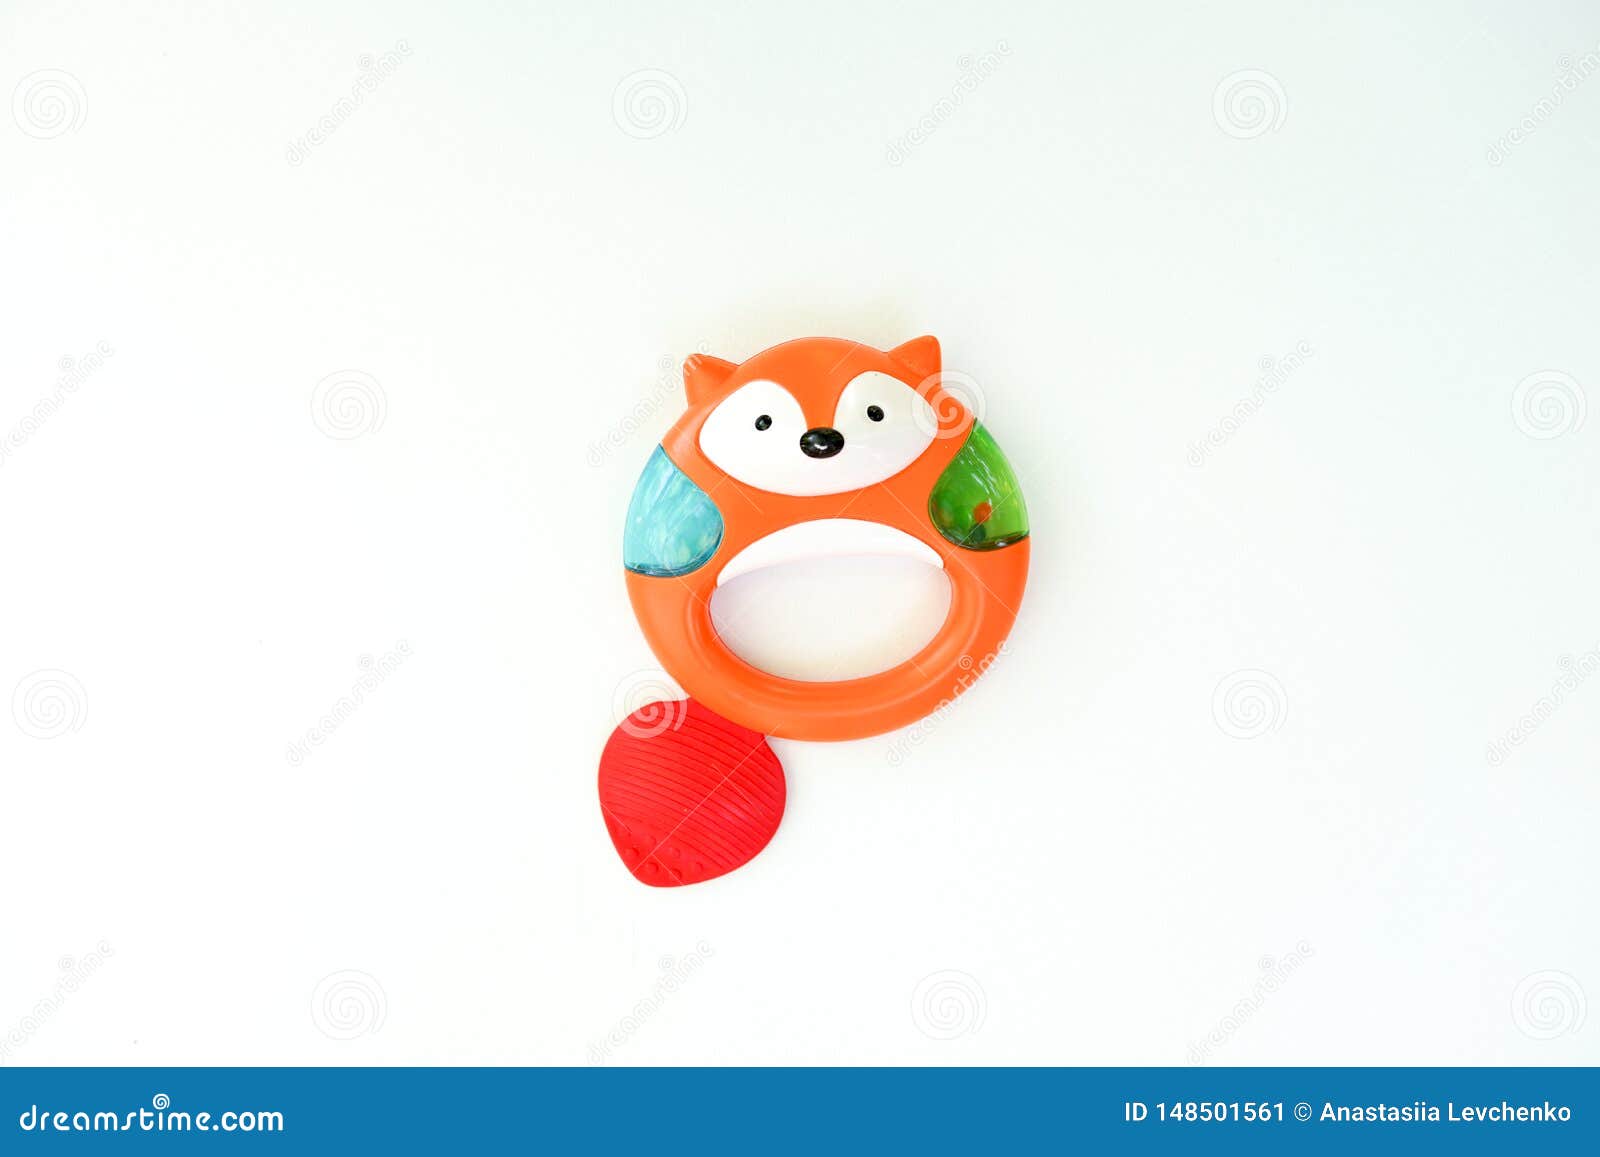 Baby Toy Fox. Toys for Newborn Child Stock Image - Image of gift, lover:  148501561